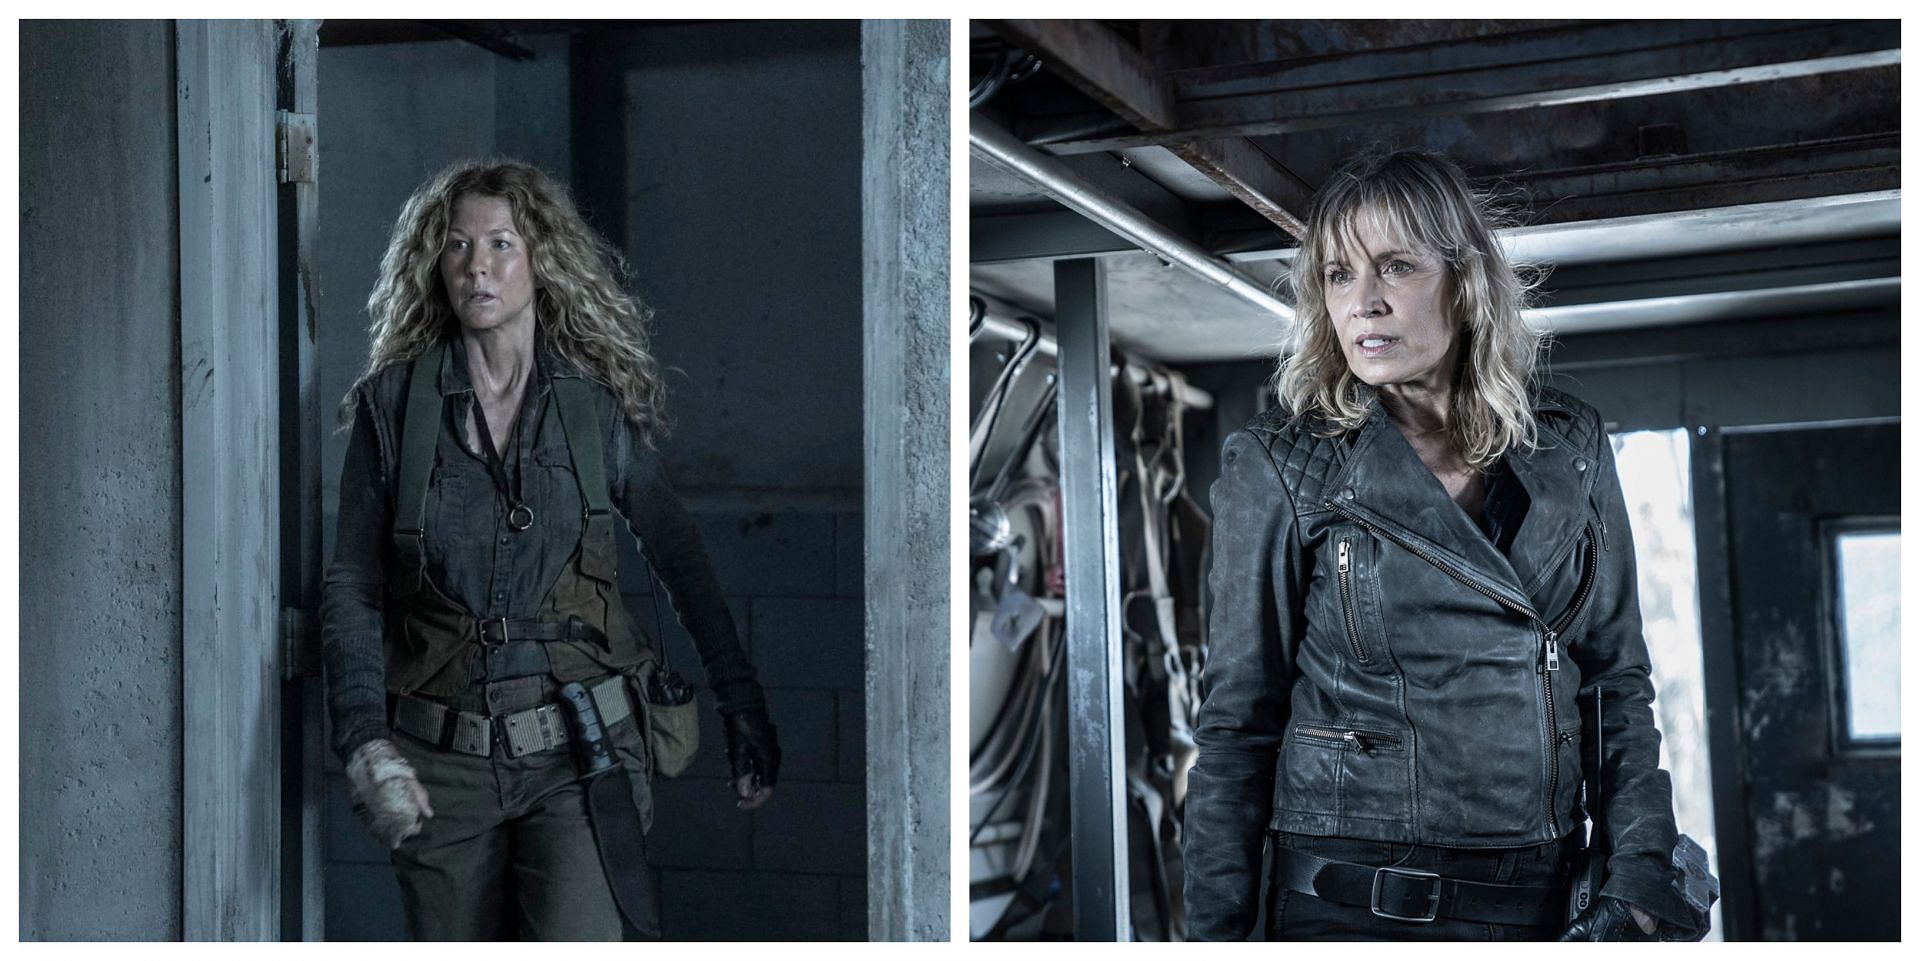 Jenna Elfman and Kim Dickens (Images from official Facebook pages)